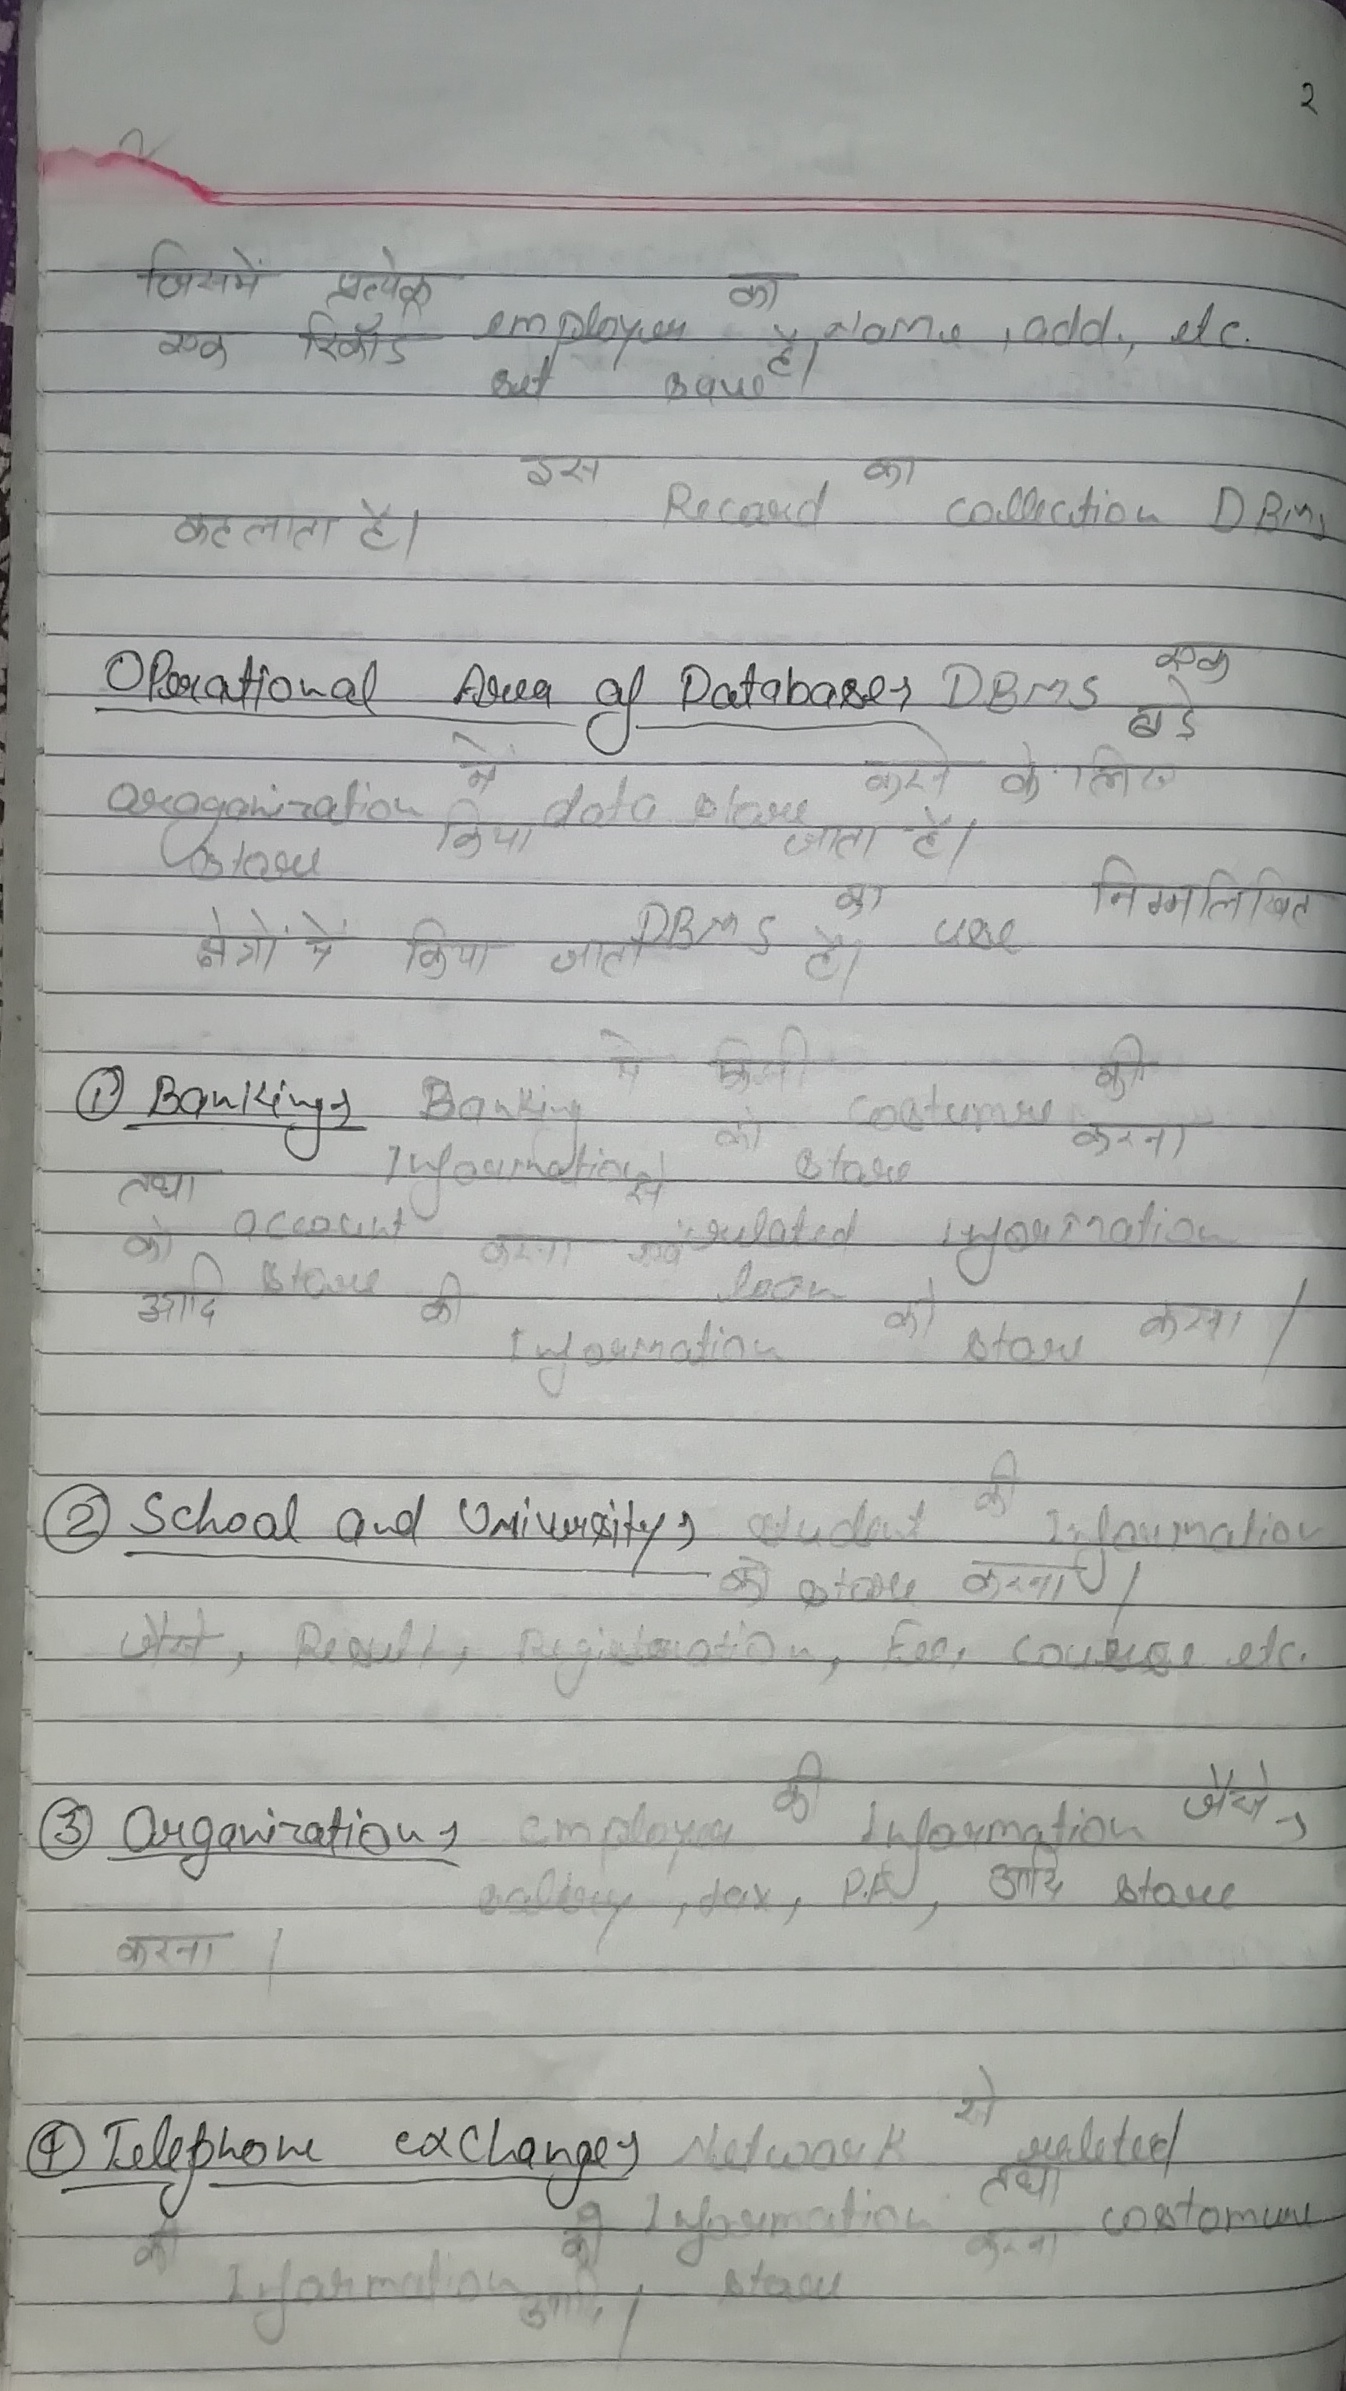 OPERATION AREA OF DATABASE (First semester notes) Chapter-1 (Part-2) Makhanlal chaturvedi national University,Bhopal-IMG_20190519_082327.jpg